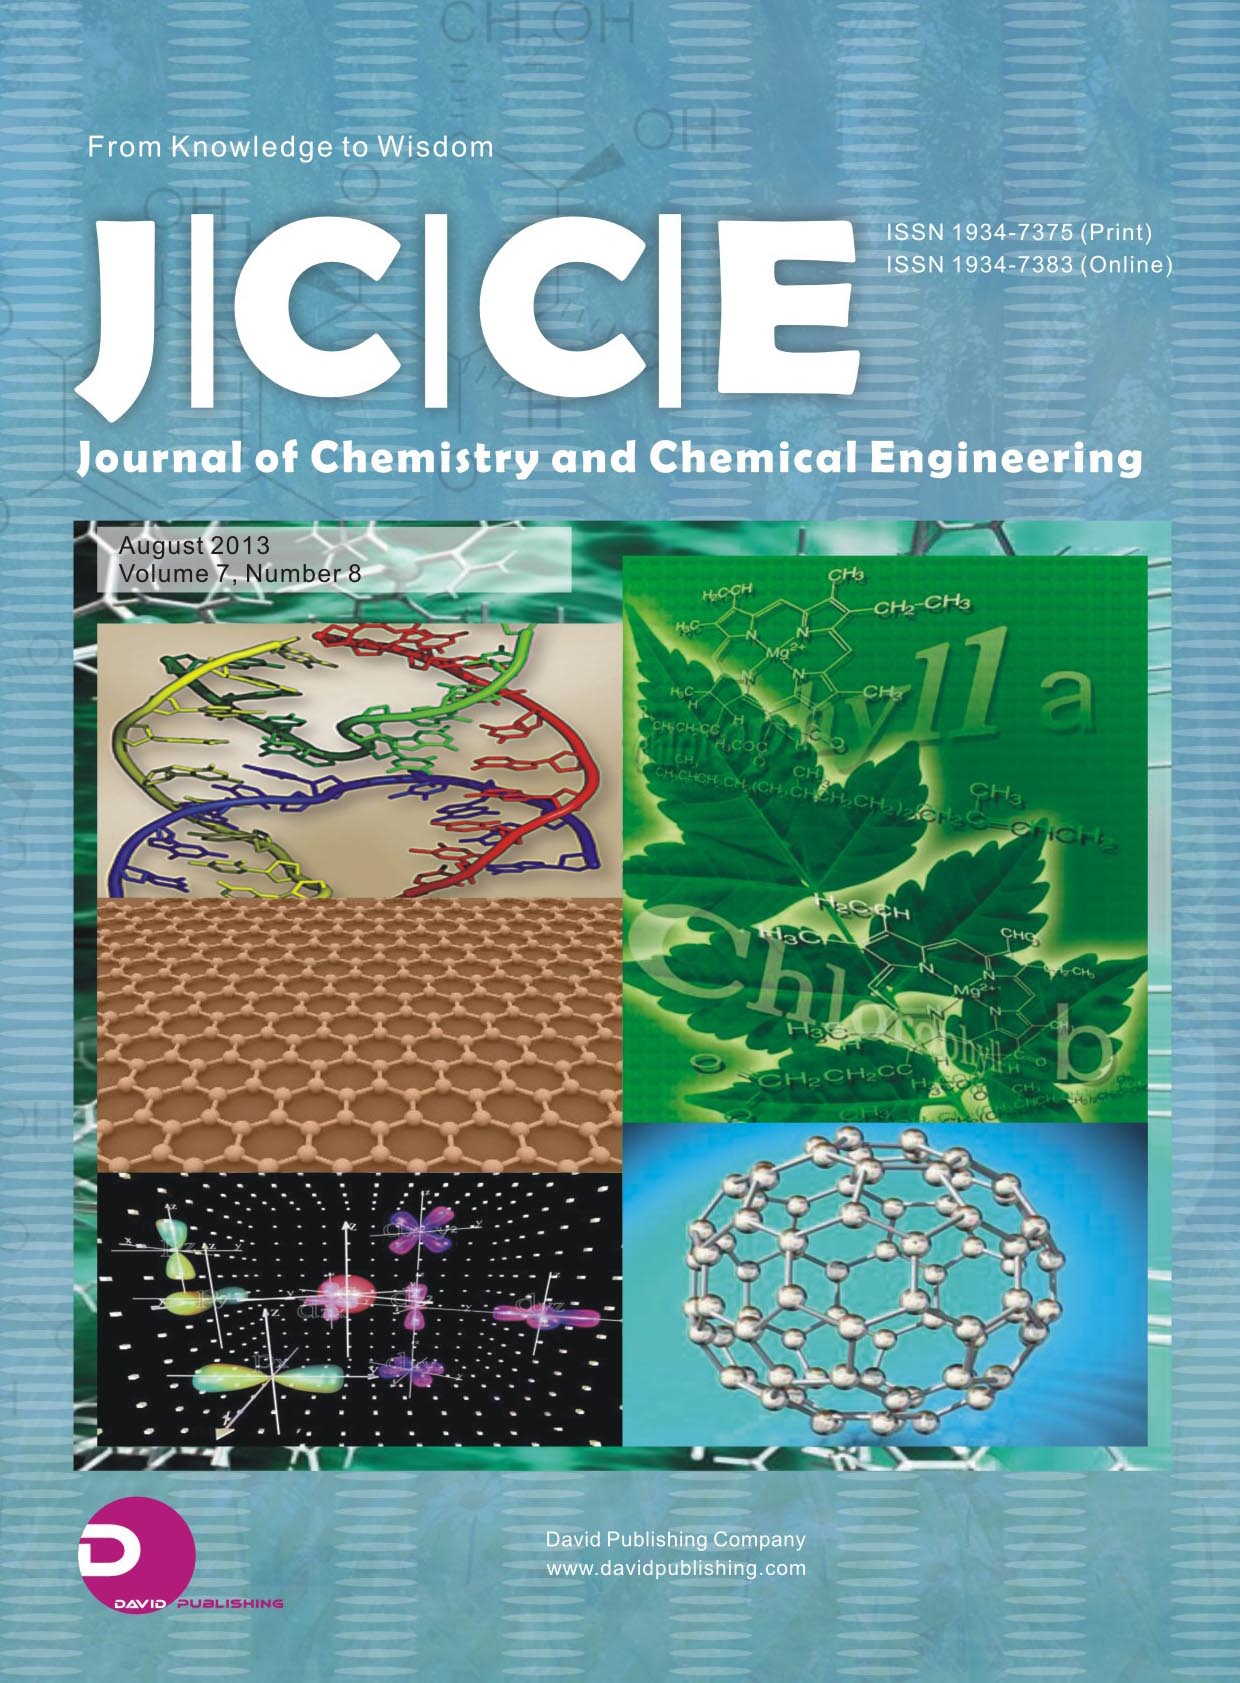 Journal: Journal of Chemistry and Chemical Engineering